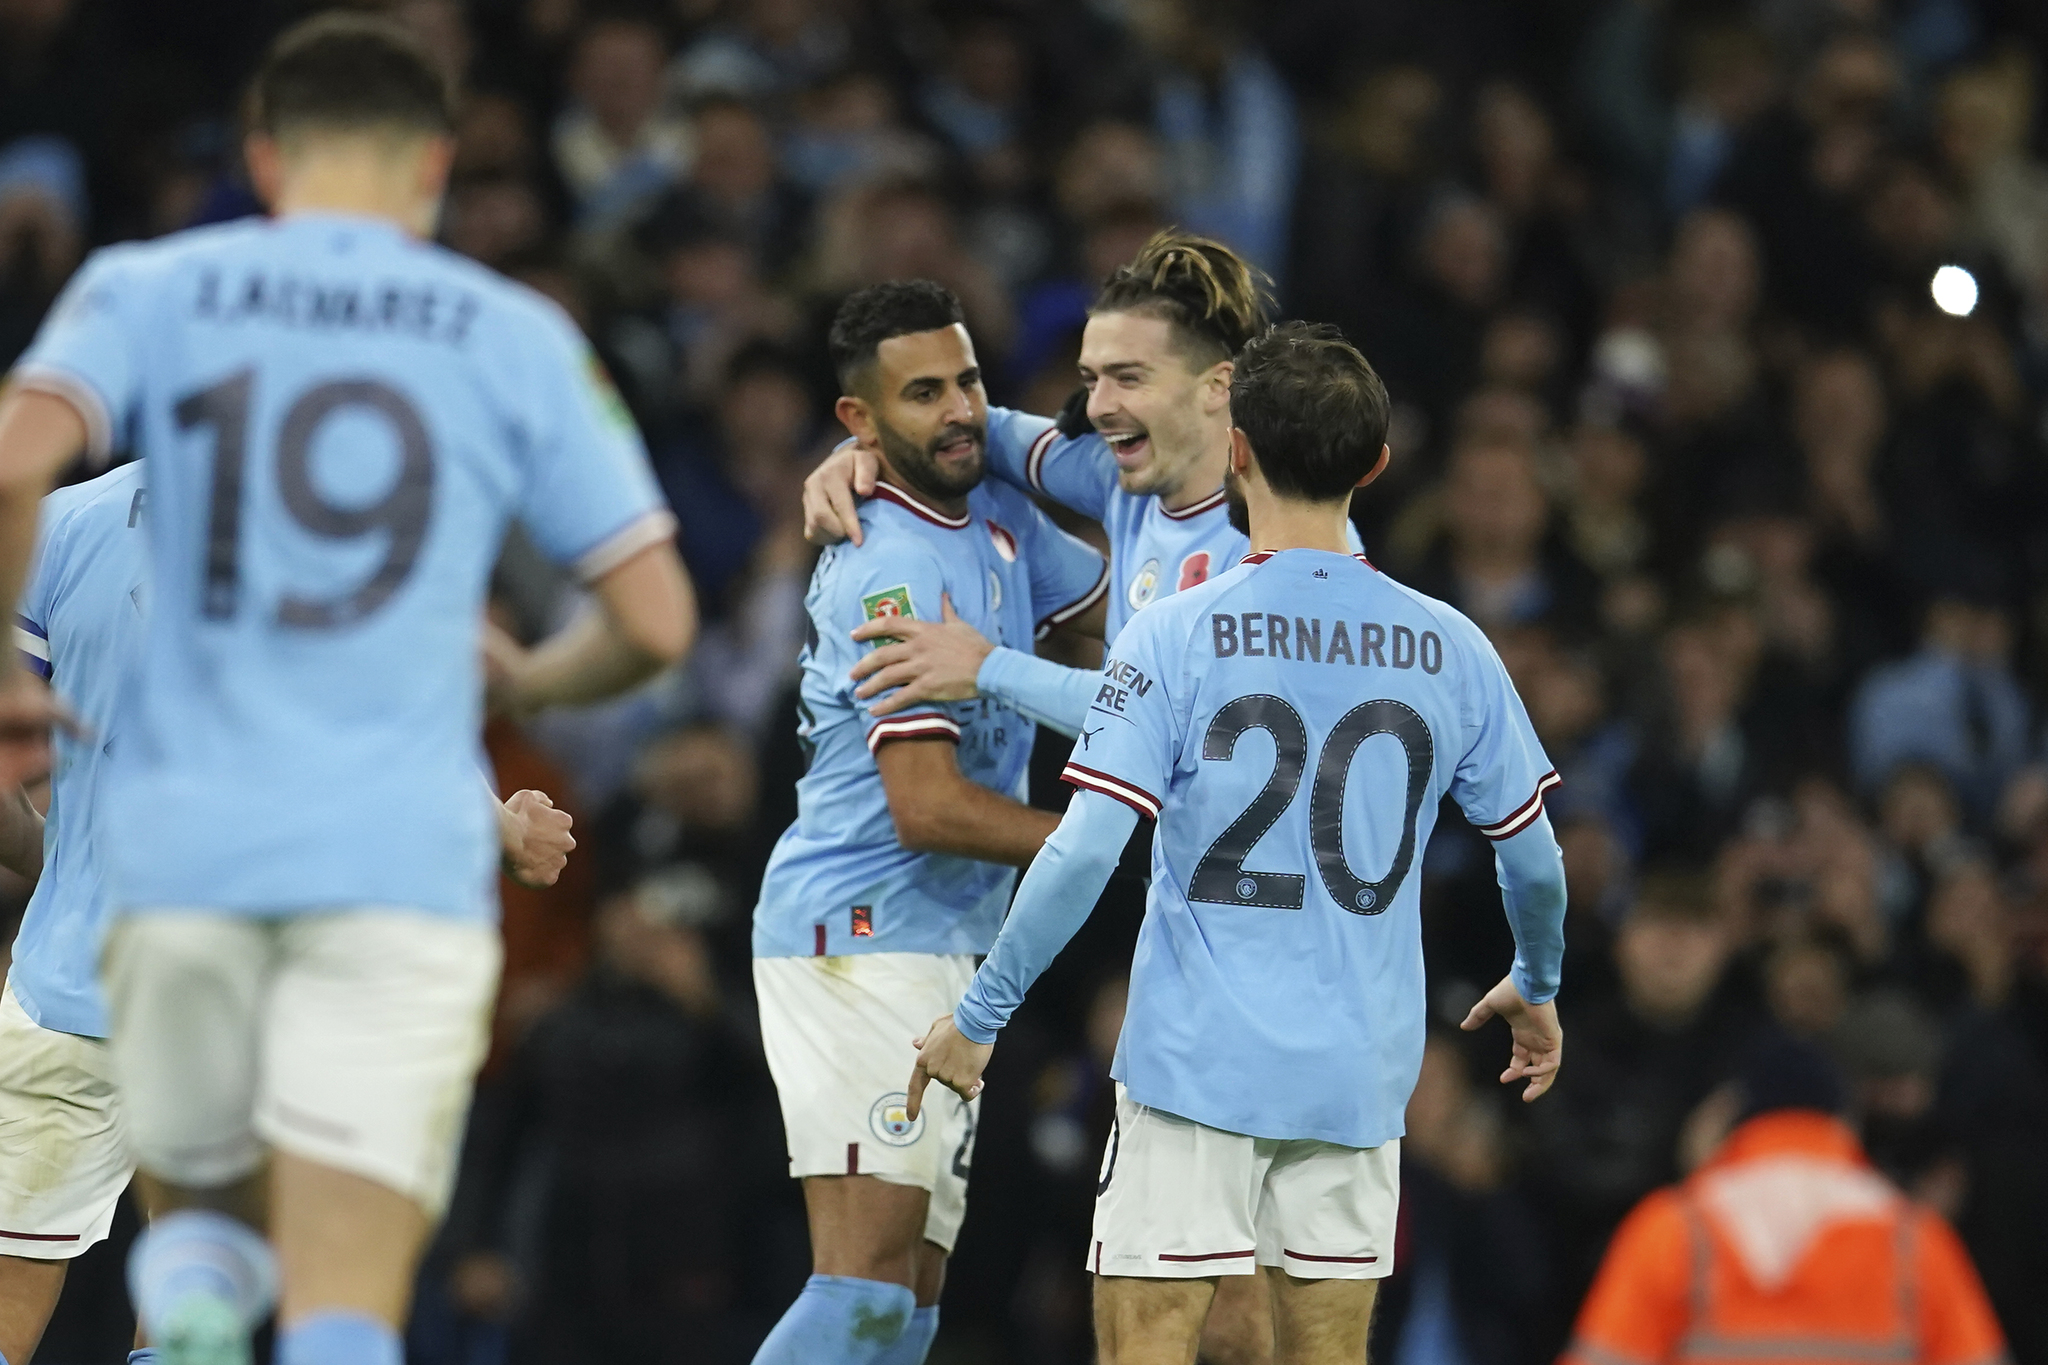 Manchester City's Riyad, Heat GT, Lieutenant Mahrez, / Heat GT, third from right, celebrates with his teammates after scoring the opening goal for his team during the English Premier League Cup third round football match between Manchester City and Chelsea at the Etihad Stadium in Manchester, England, Wednesday, November 9, 2022 (AP Photo/Dave Thompson)